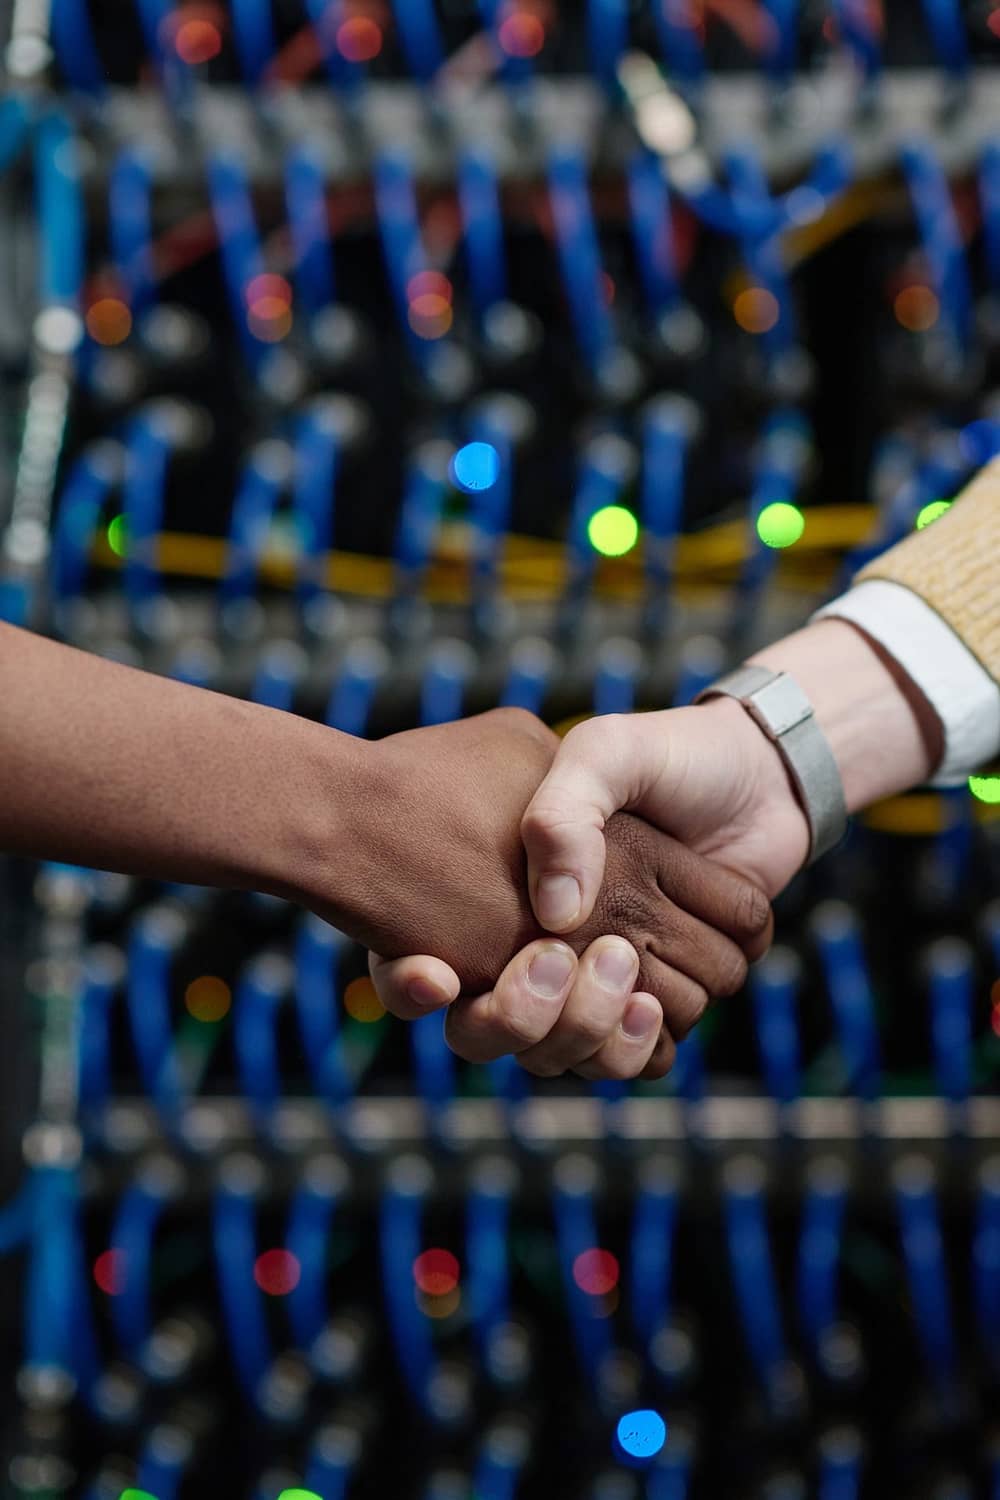 Server engineers shaking hands at office